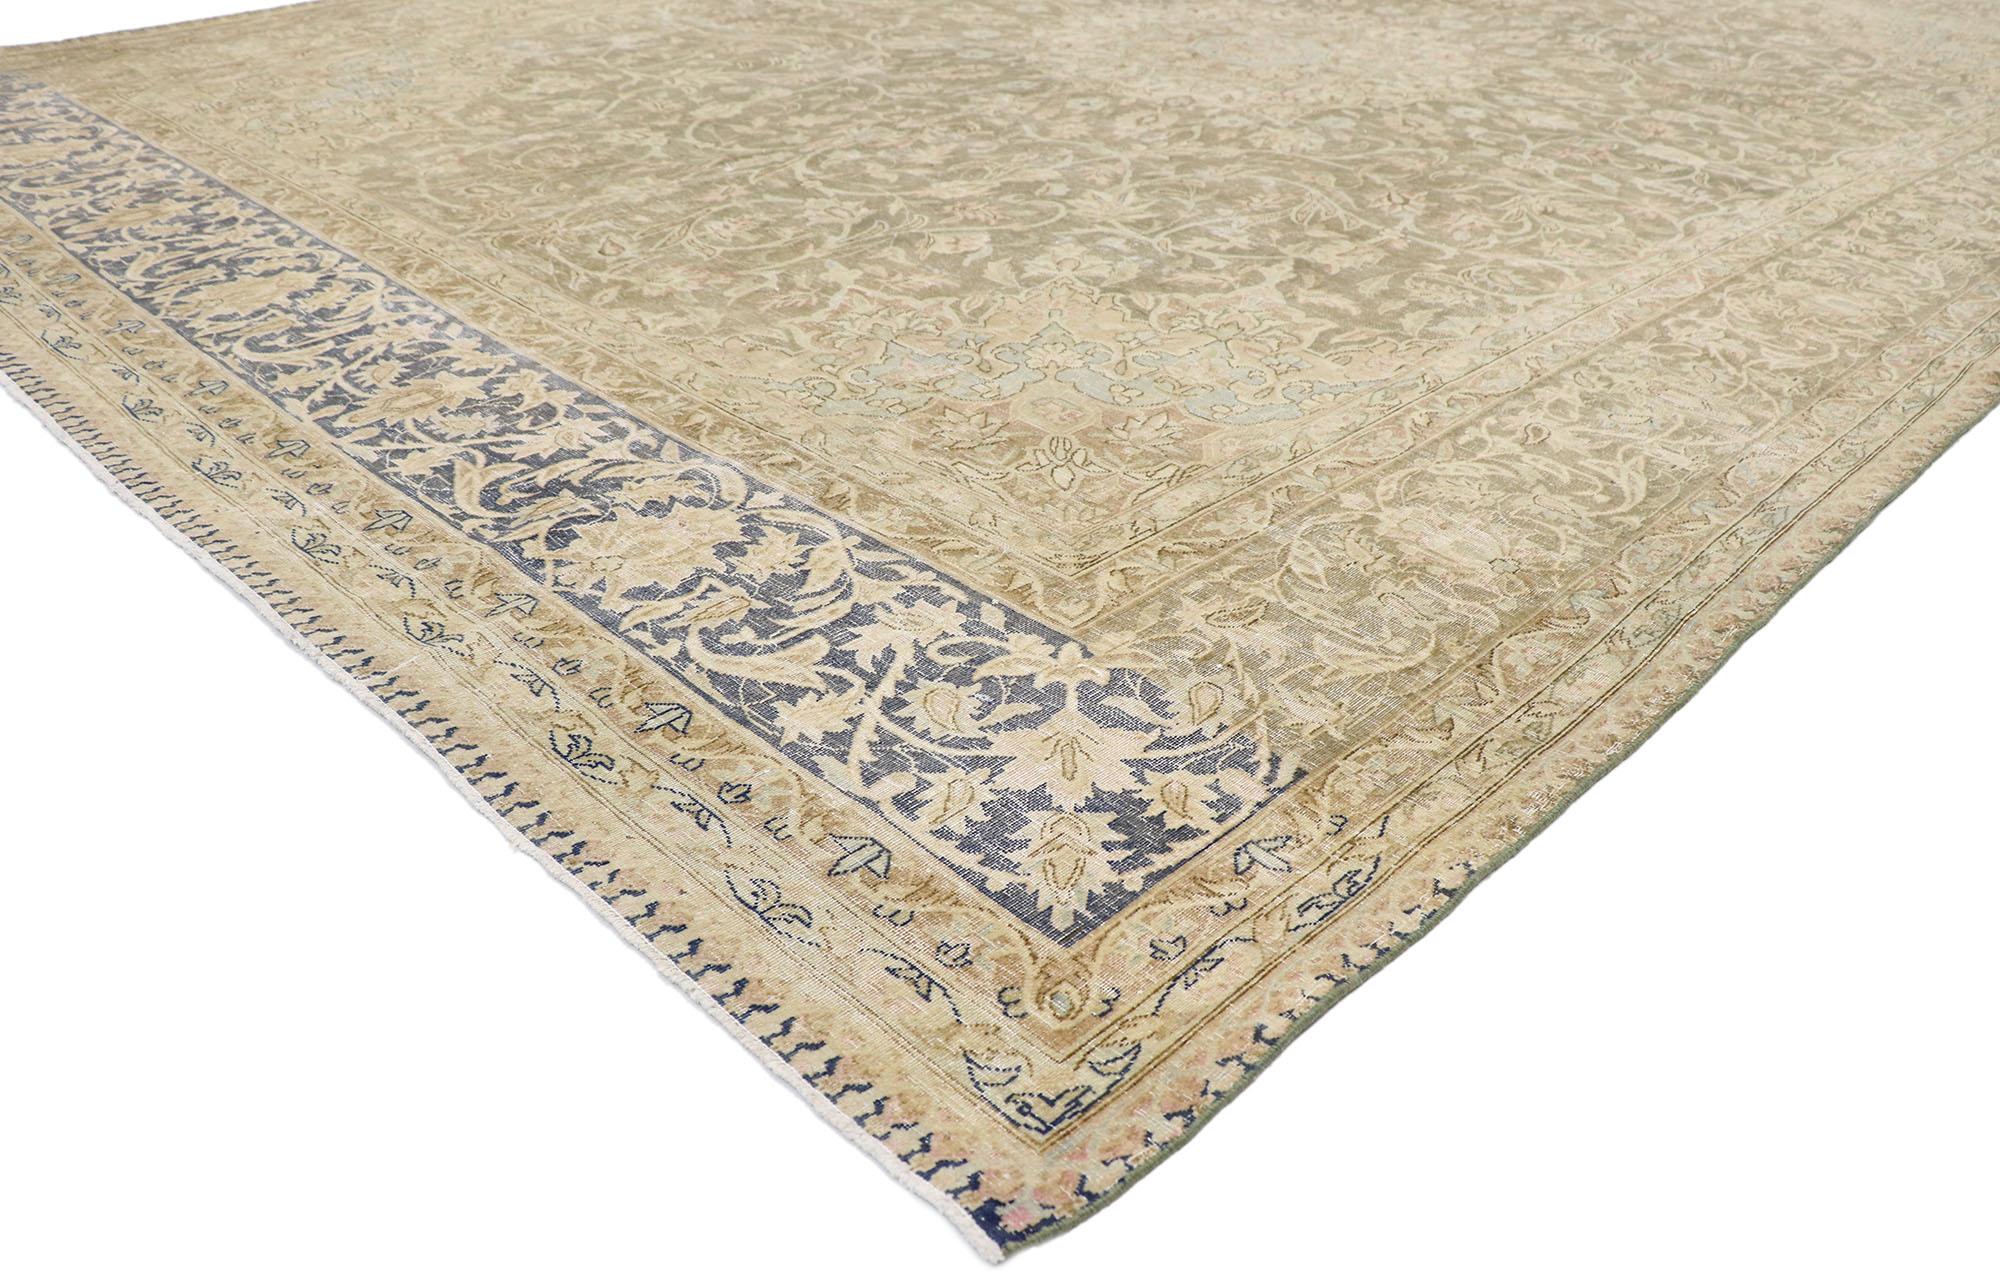 60828 Distressed Antique Persian Kerman rug with Rustic French Country style. With its timeless floral design and rustic sensibility, this hand-knotted wool distressed antique Persian Kerman rug beautifully embodies French Country simplicity. The